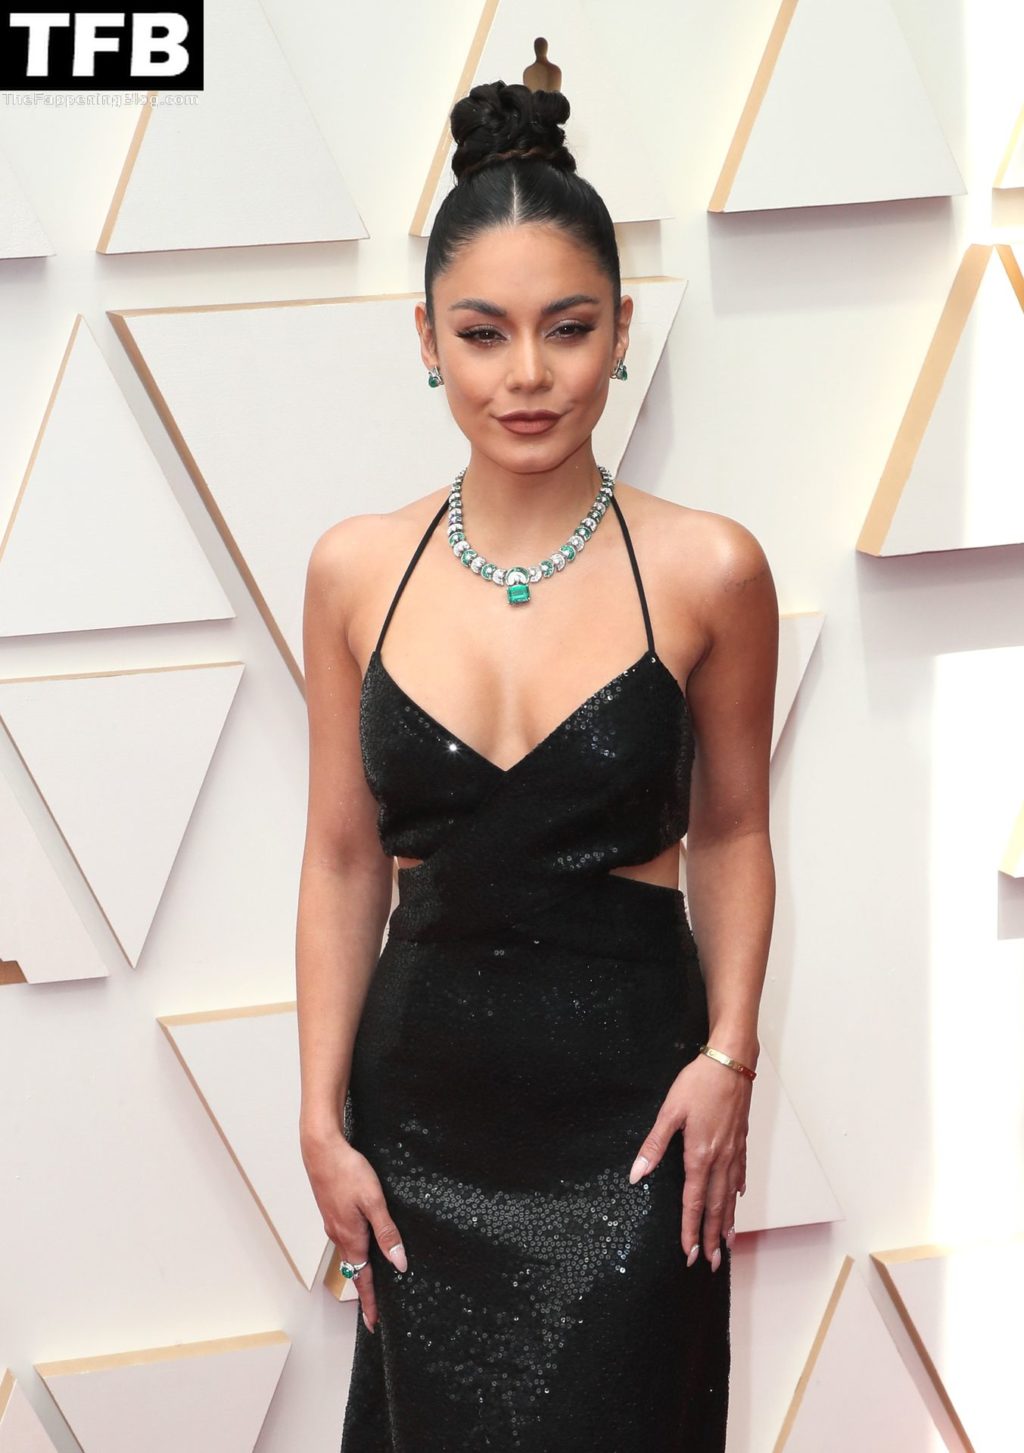 Vanessa Hudgens Sexy The Fappening Blog 34 4 1024x1453 - Vanessa Hudgens Poses on the Red Carpet at the 94th Annual Academy Awards (83 Photos)